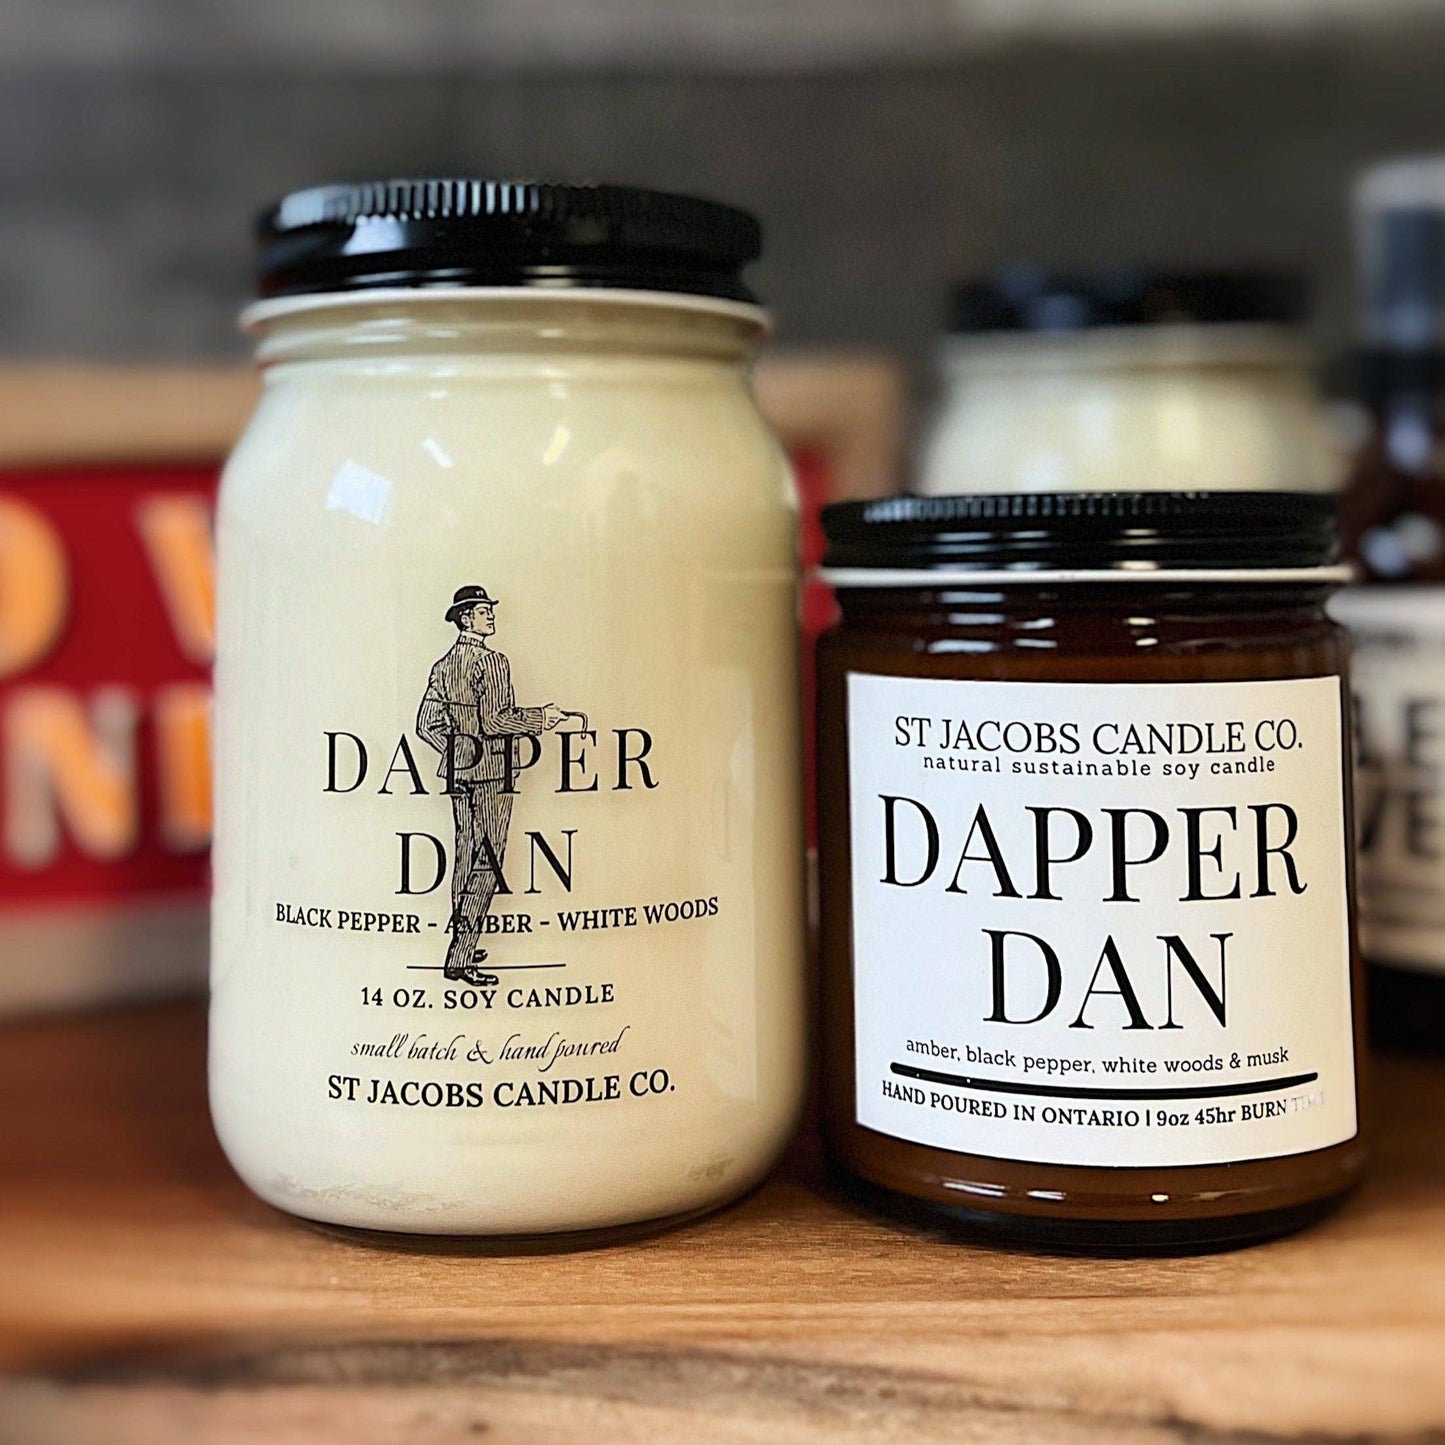 St Jacobs Candle Co. - "DAPPER DAN" Natural Soy Candle